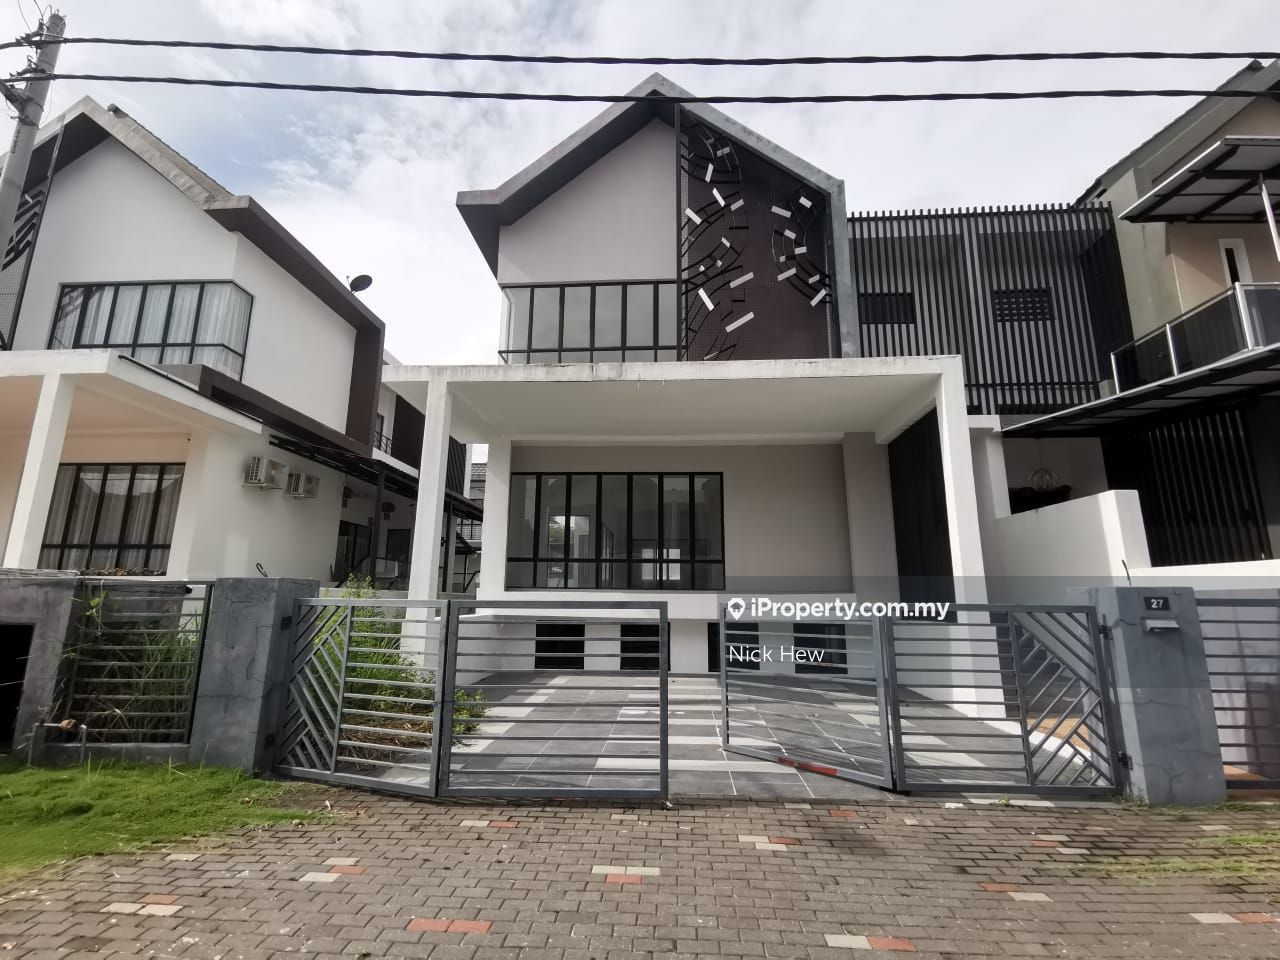 Botani, Ipoh Semi-detached House 7 bedrooms for sale | iProperty.com.my